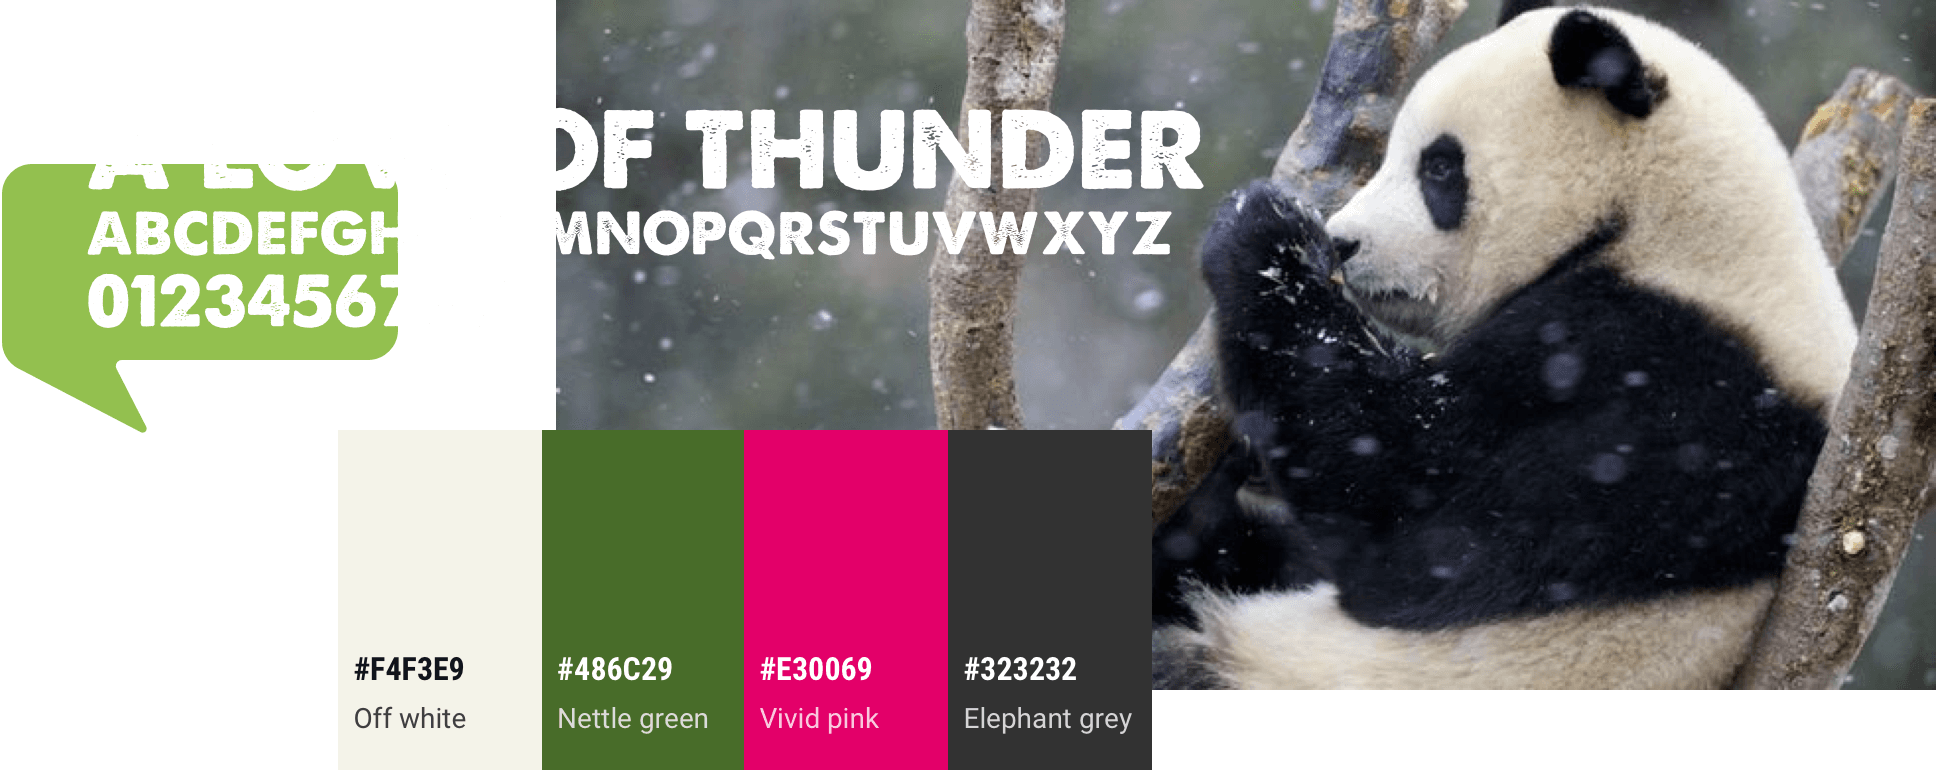 The Love of Thunder font, a simple colour palette of vivid pink, green and grey, and an image of a panda bear in the trees